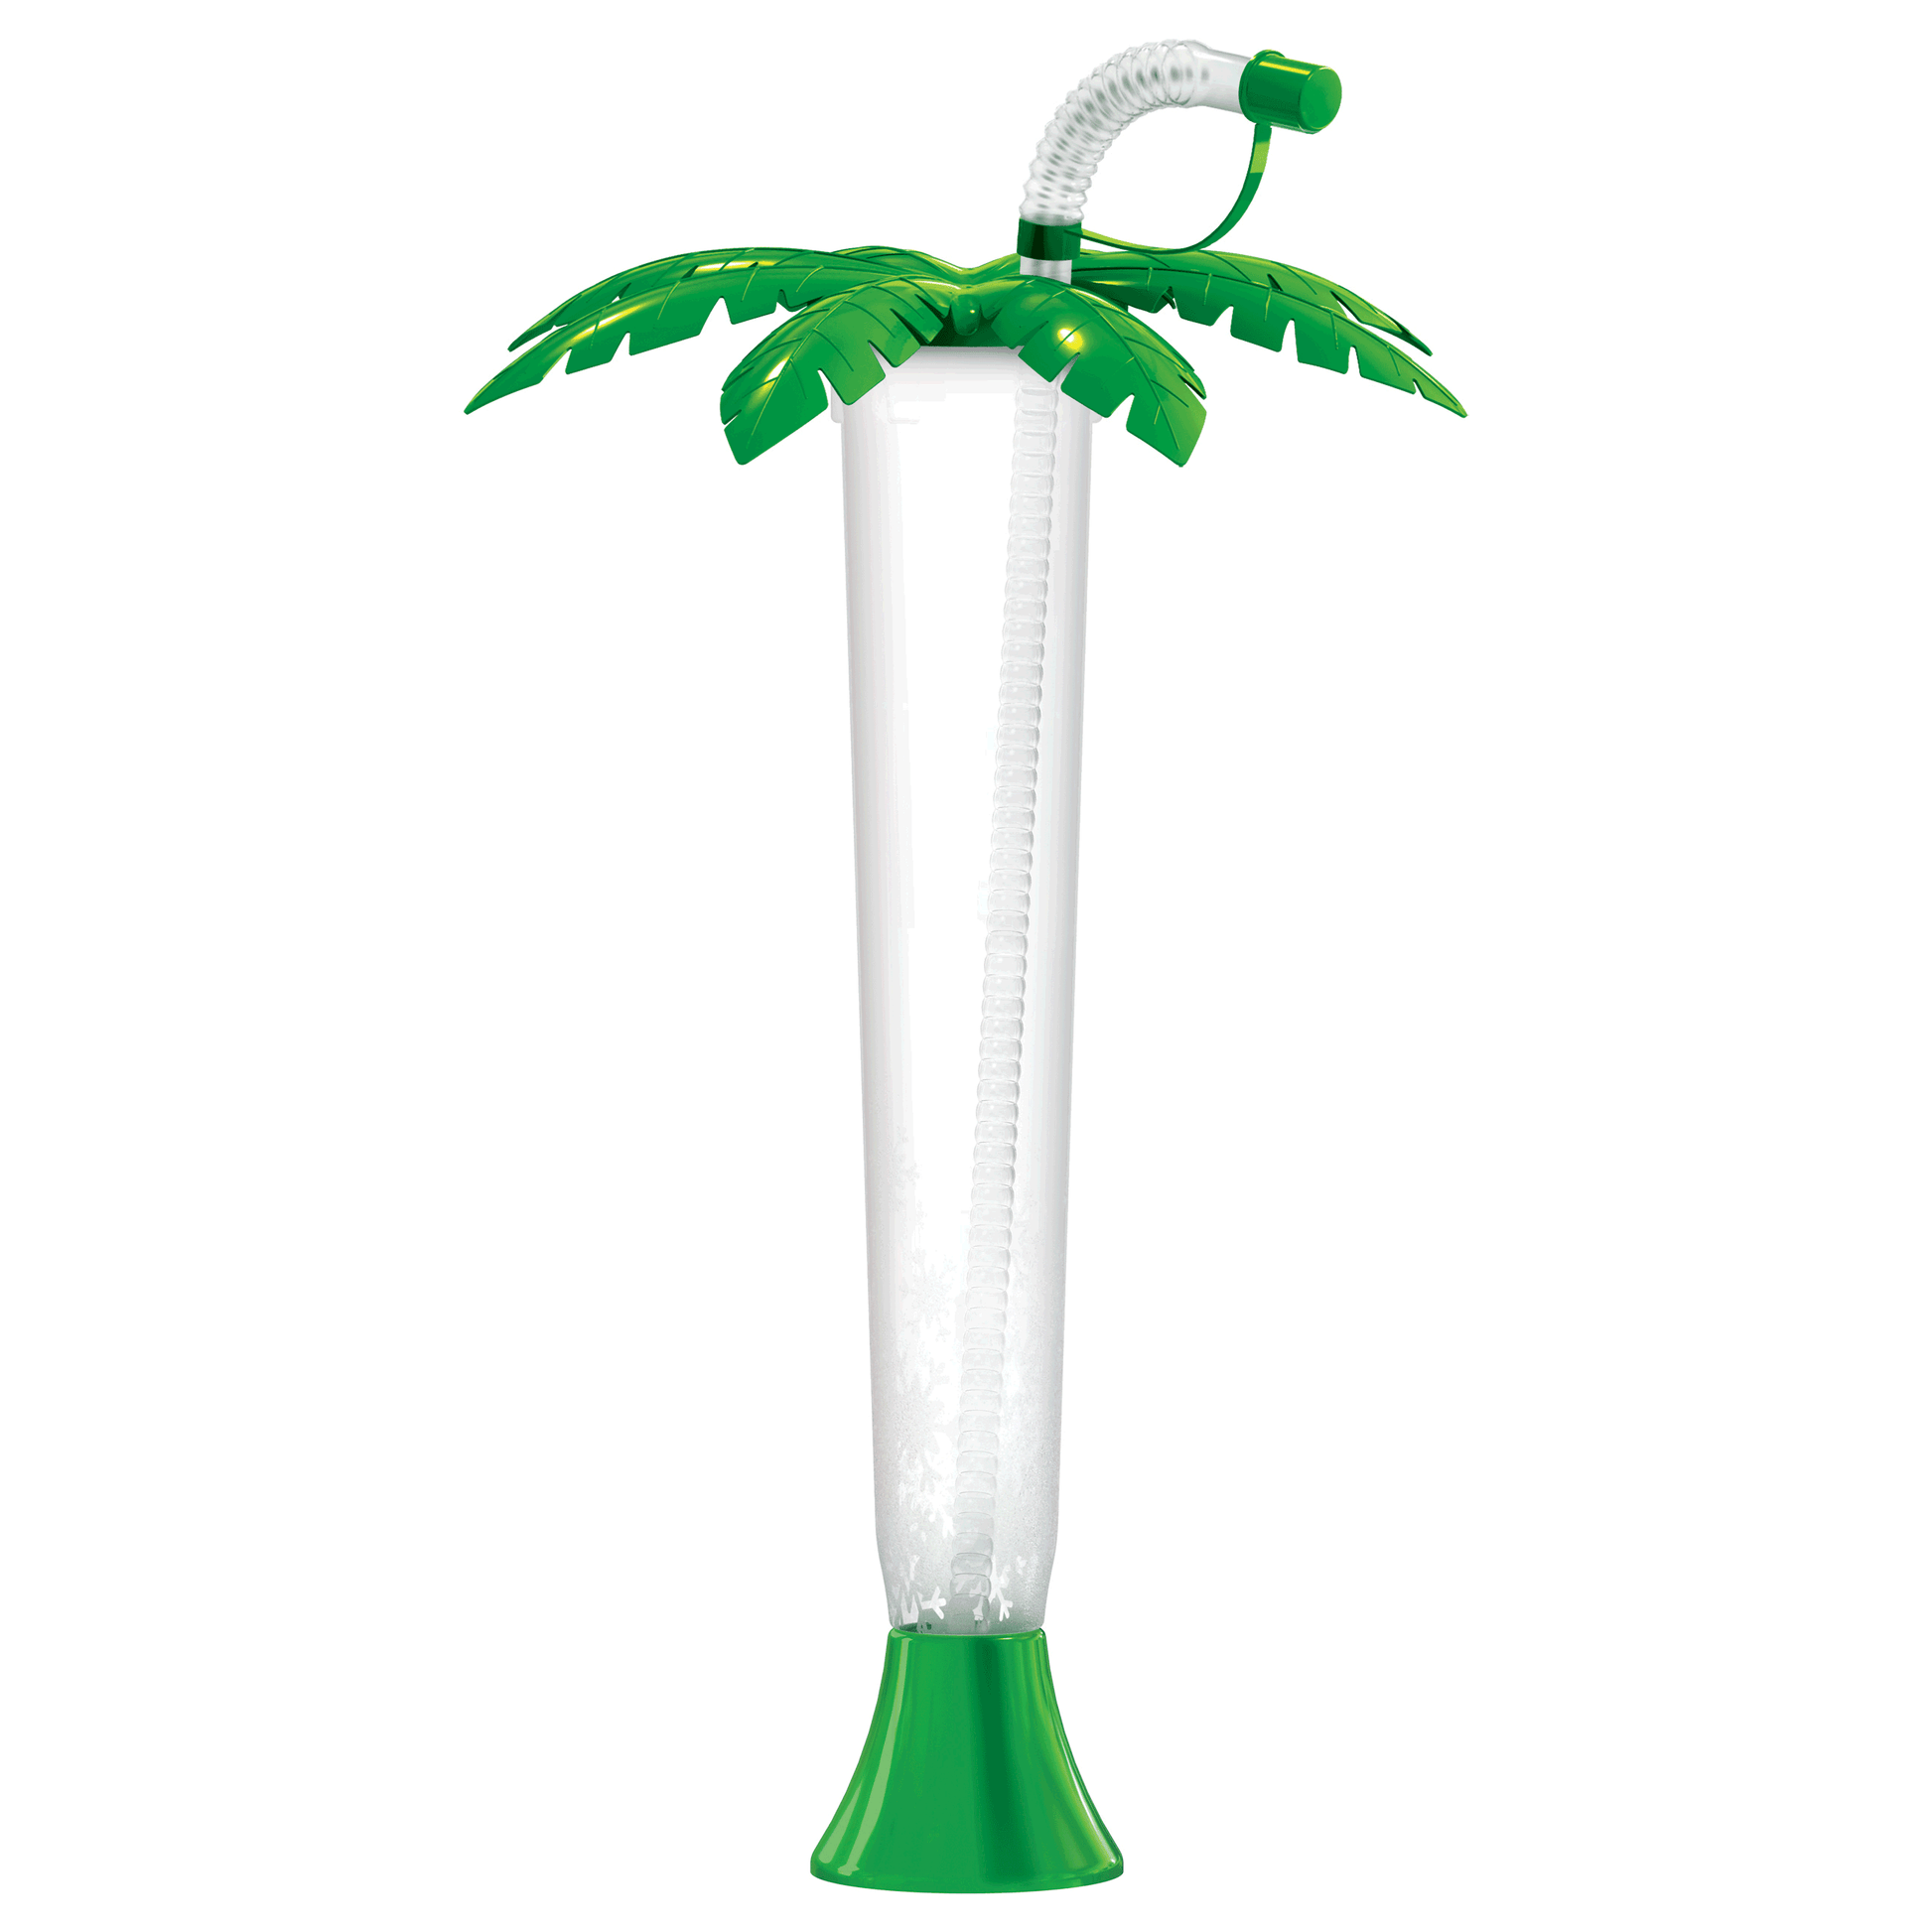 Lime Green Silicone Palm Tree Ice Tray - 4.5 oz. - Tropical Fun & Flexible  Mold - Ideal for Luau & Summer Parties (1 Pc.)